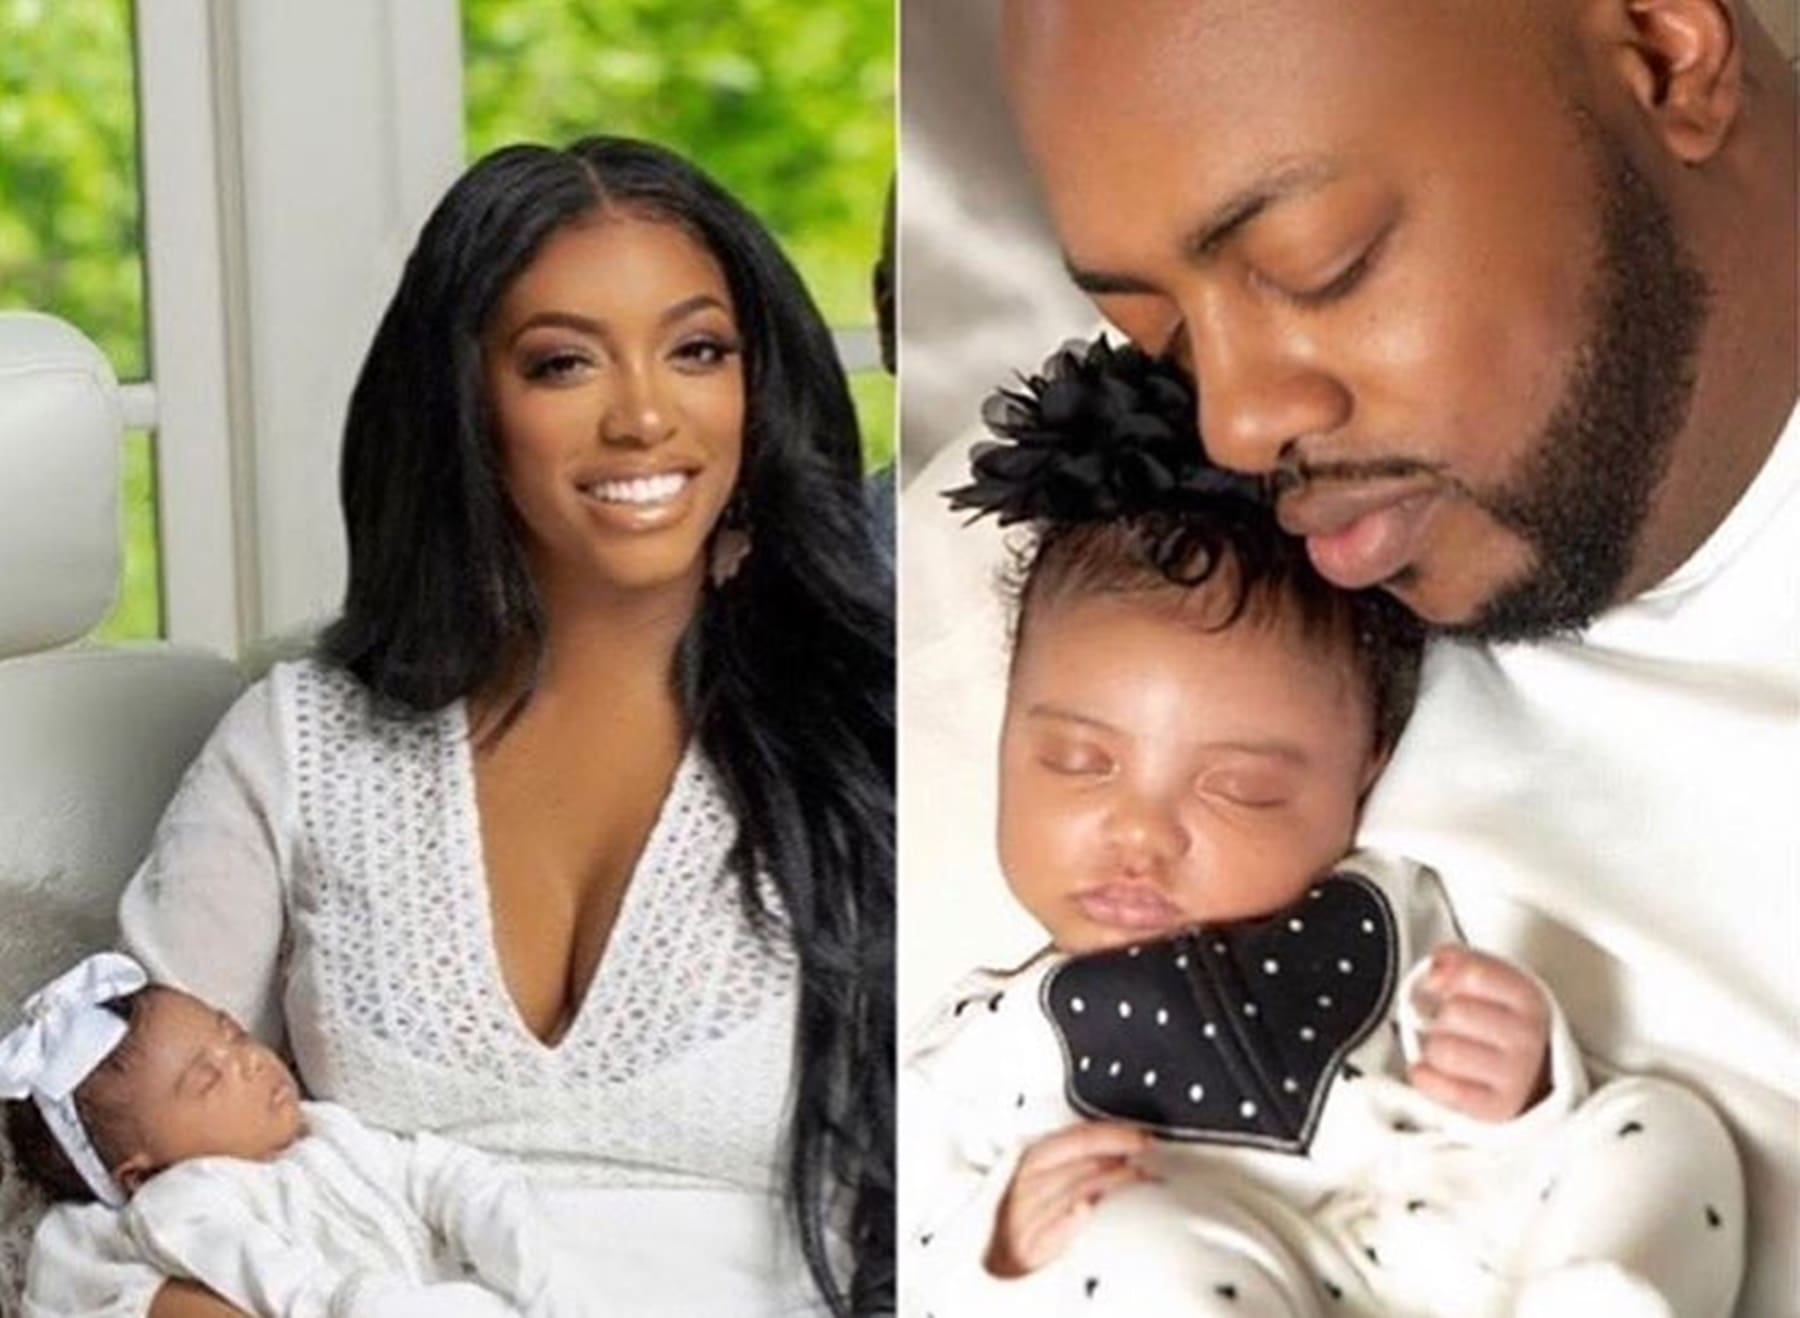 Porsha Williams' Latest Videos Of Dennis McKinley Hanging Out With Baby Pilar Jhena Will Make Your Day